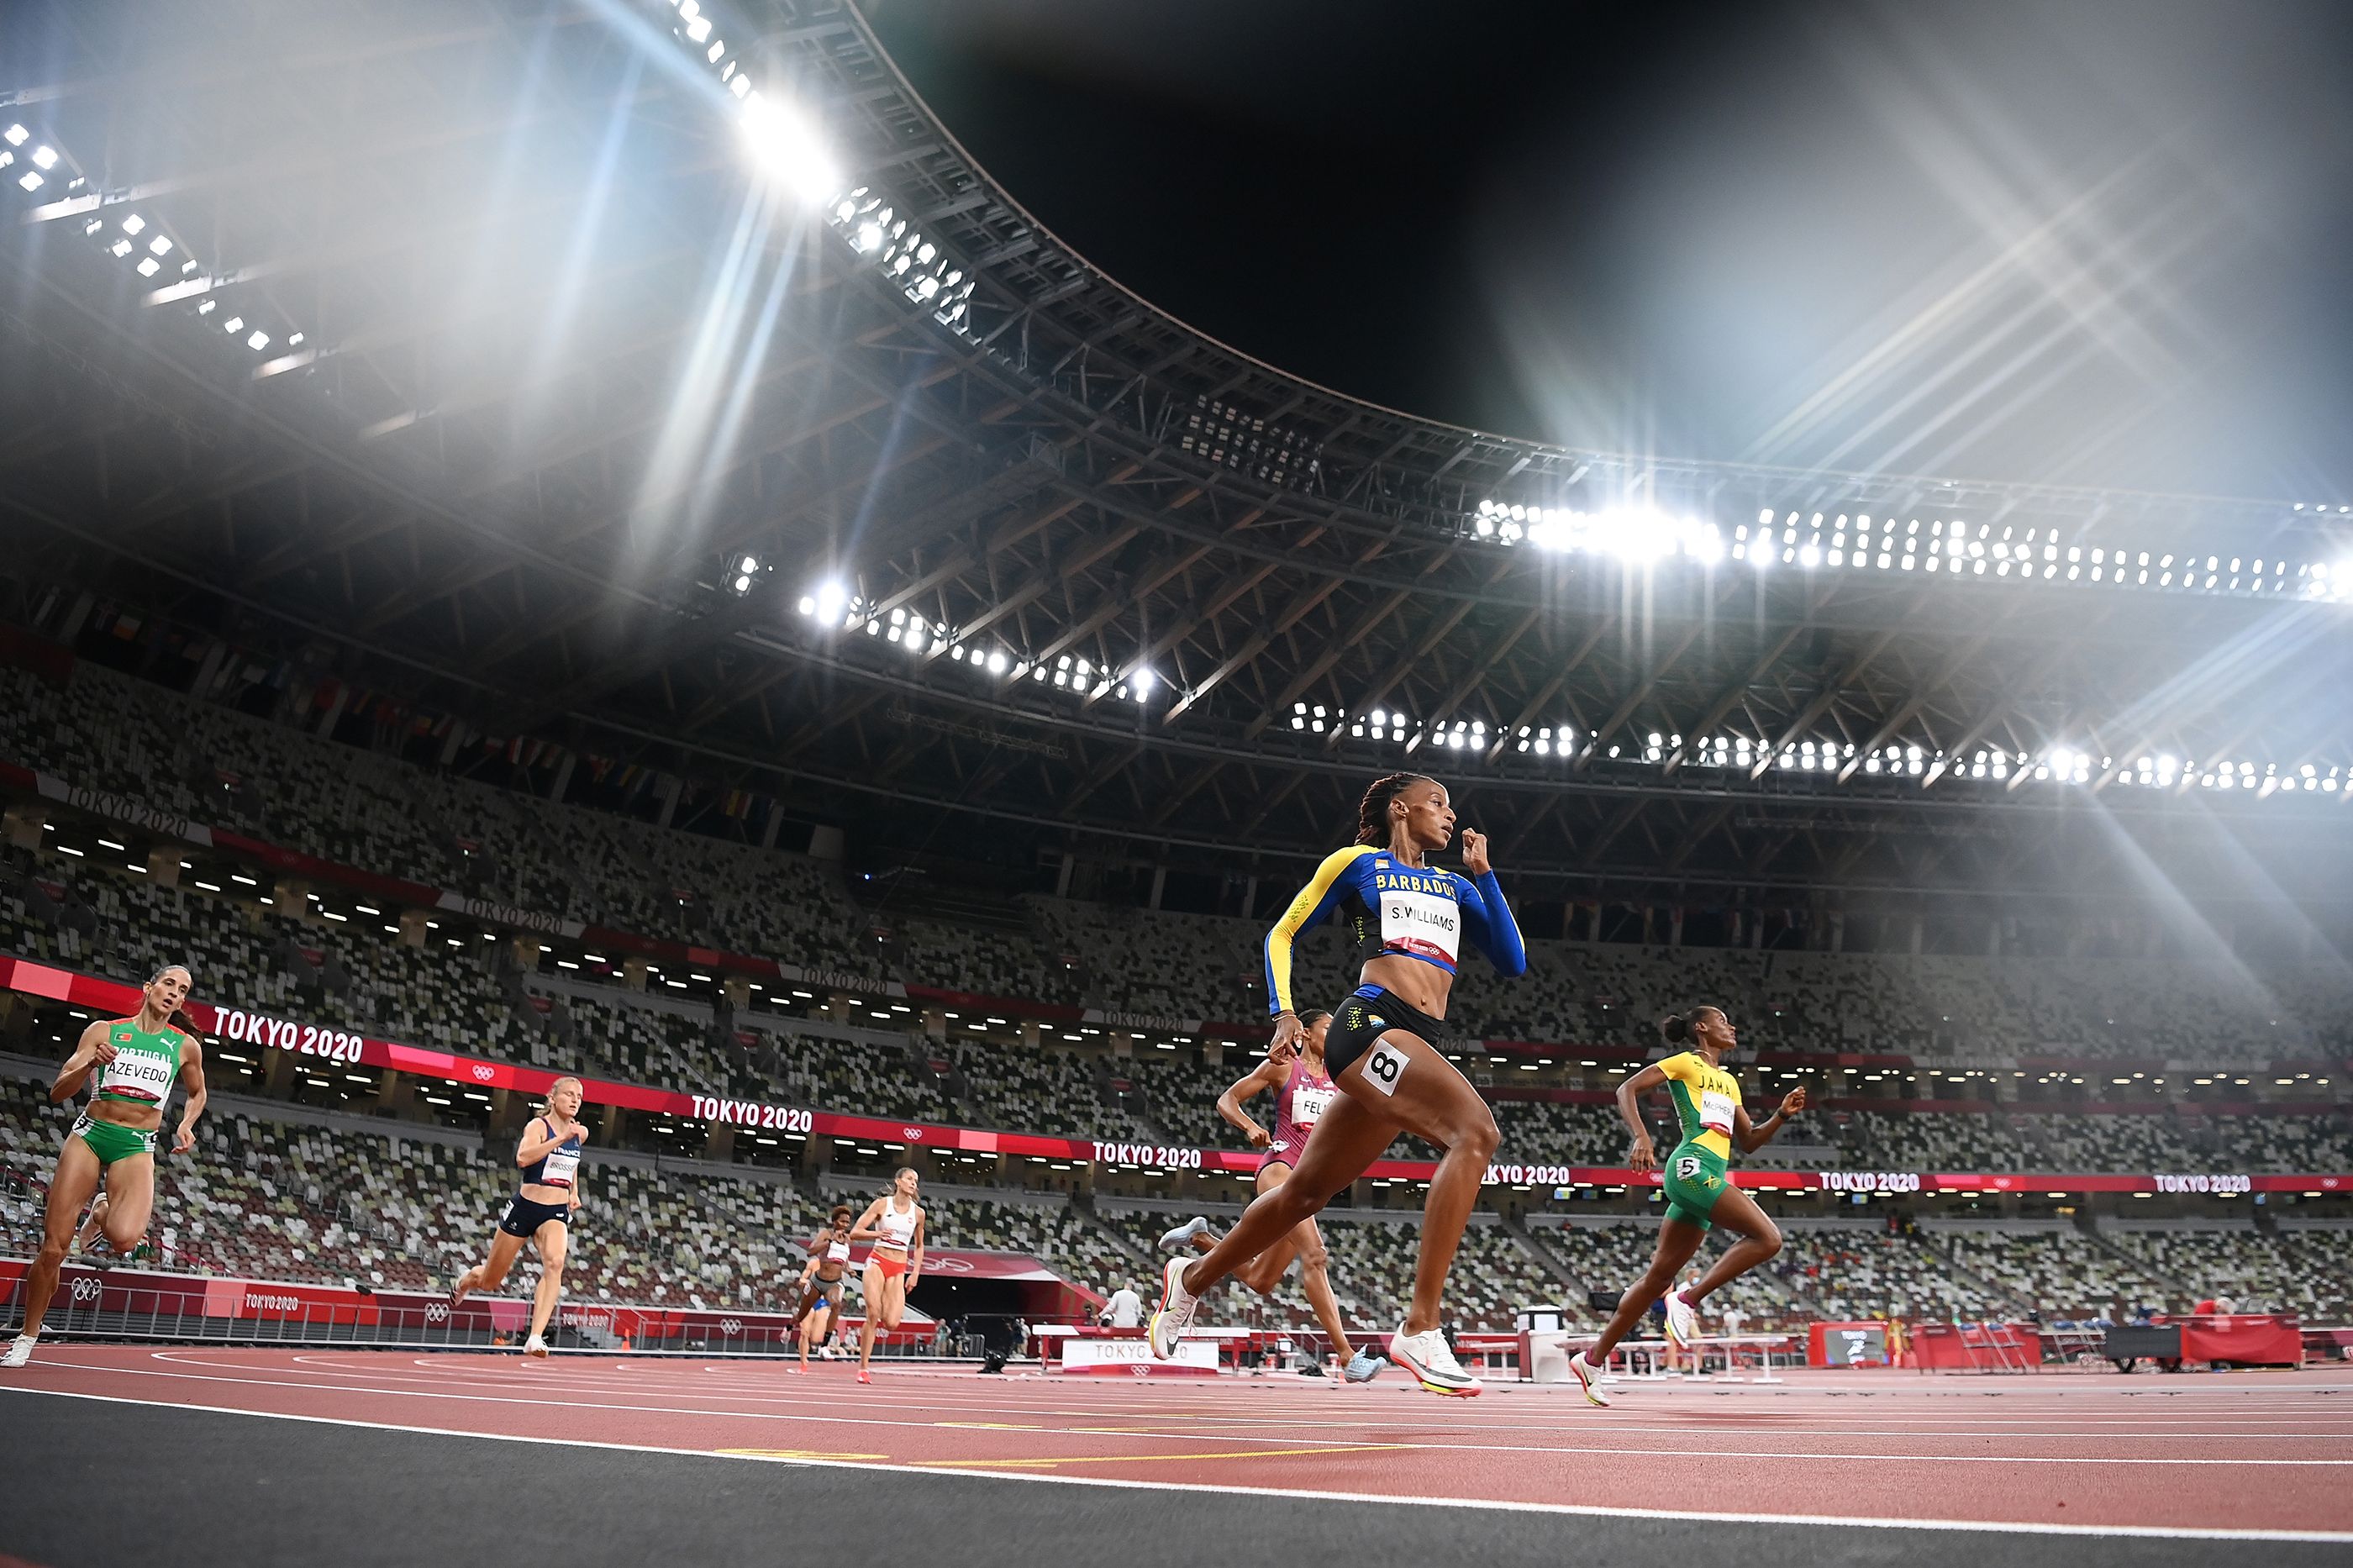 Sada Williams competes in the 400m semifinals at the Olympic Games in Tokyo